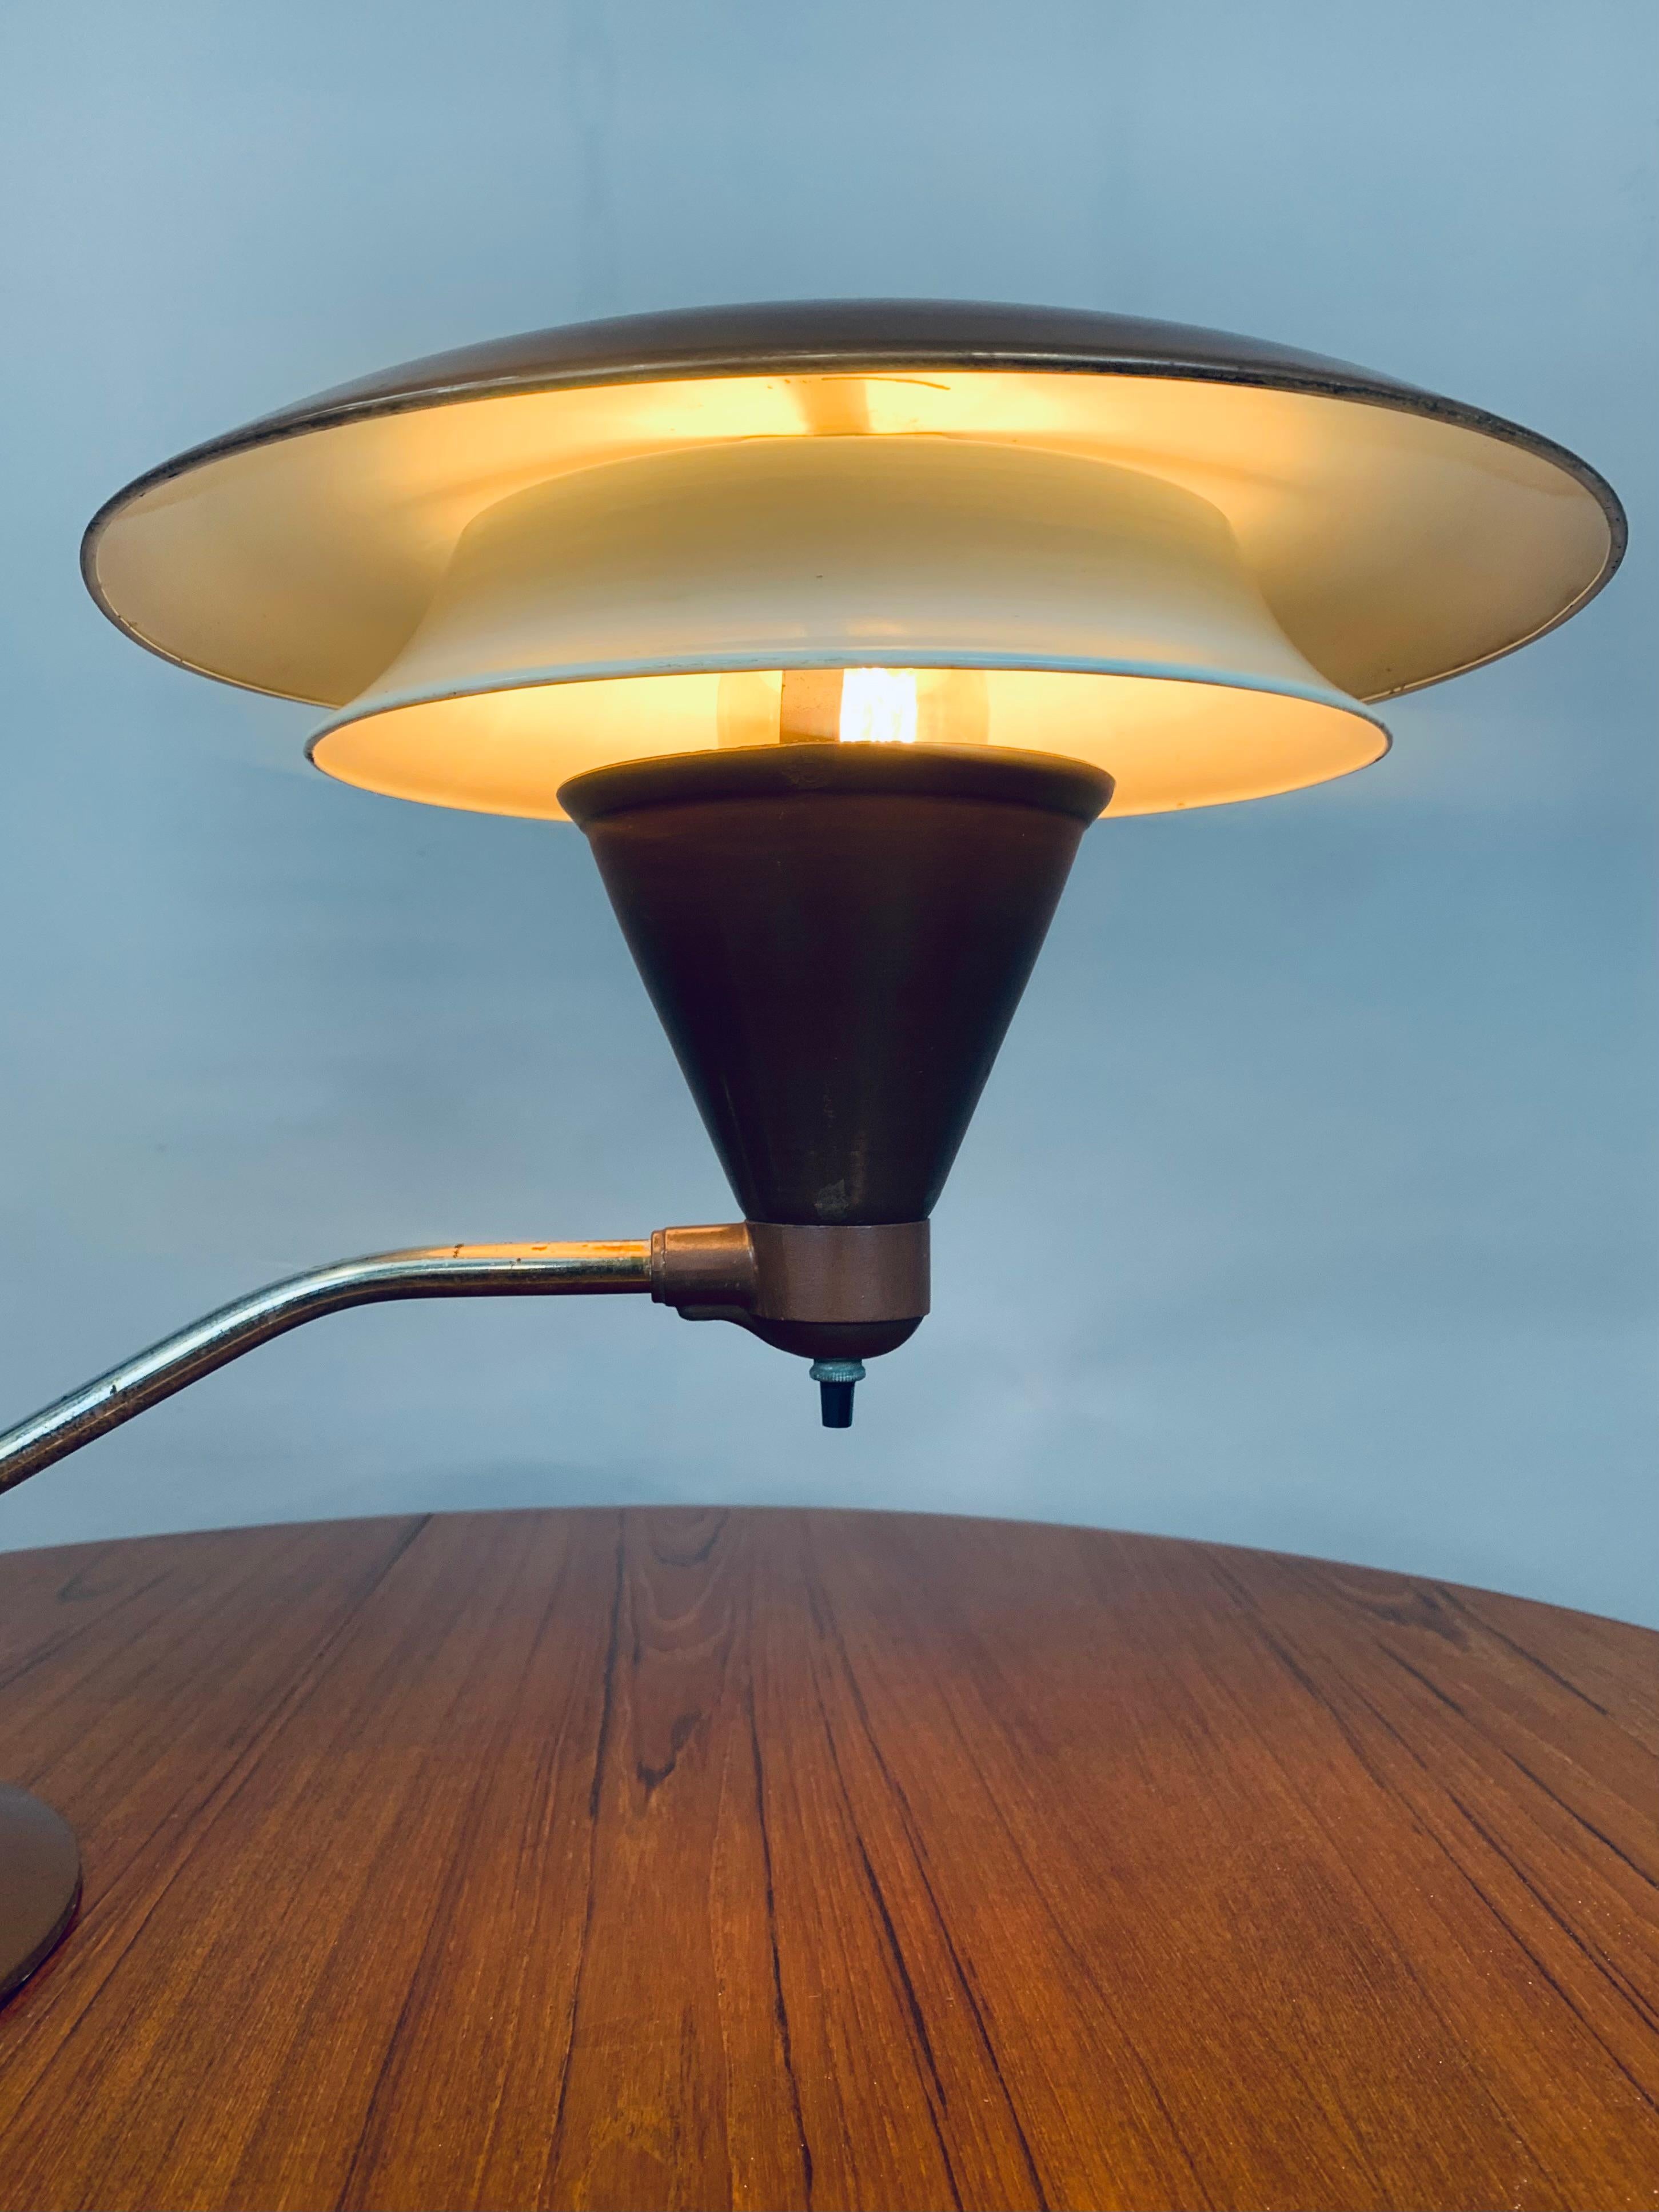 1950s Art Speciality Co Flying Saucer Desk Lamp 1